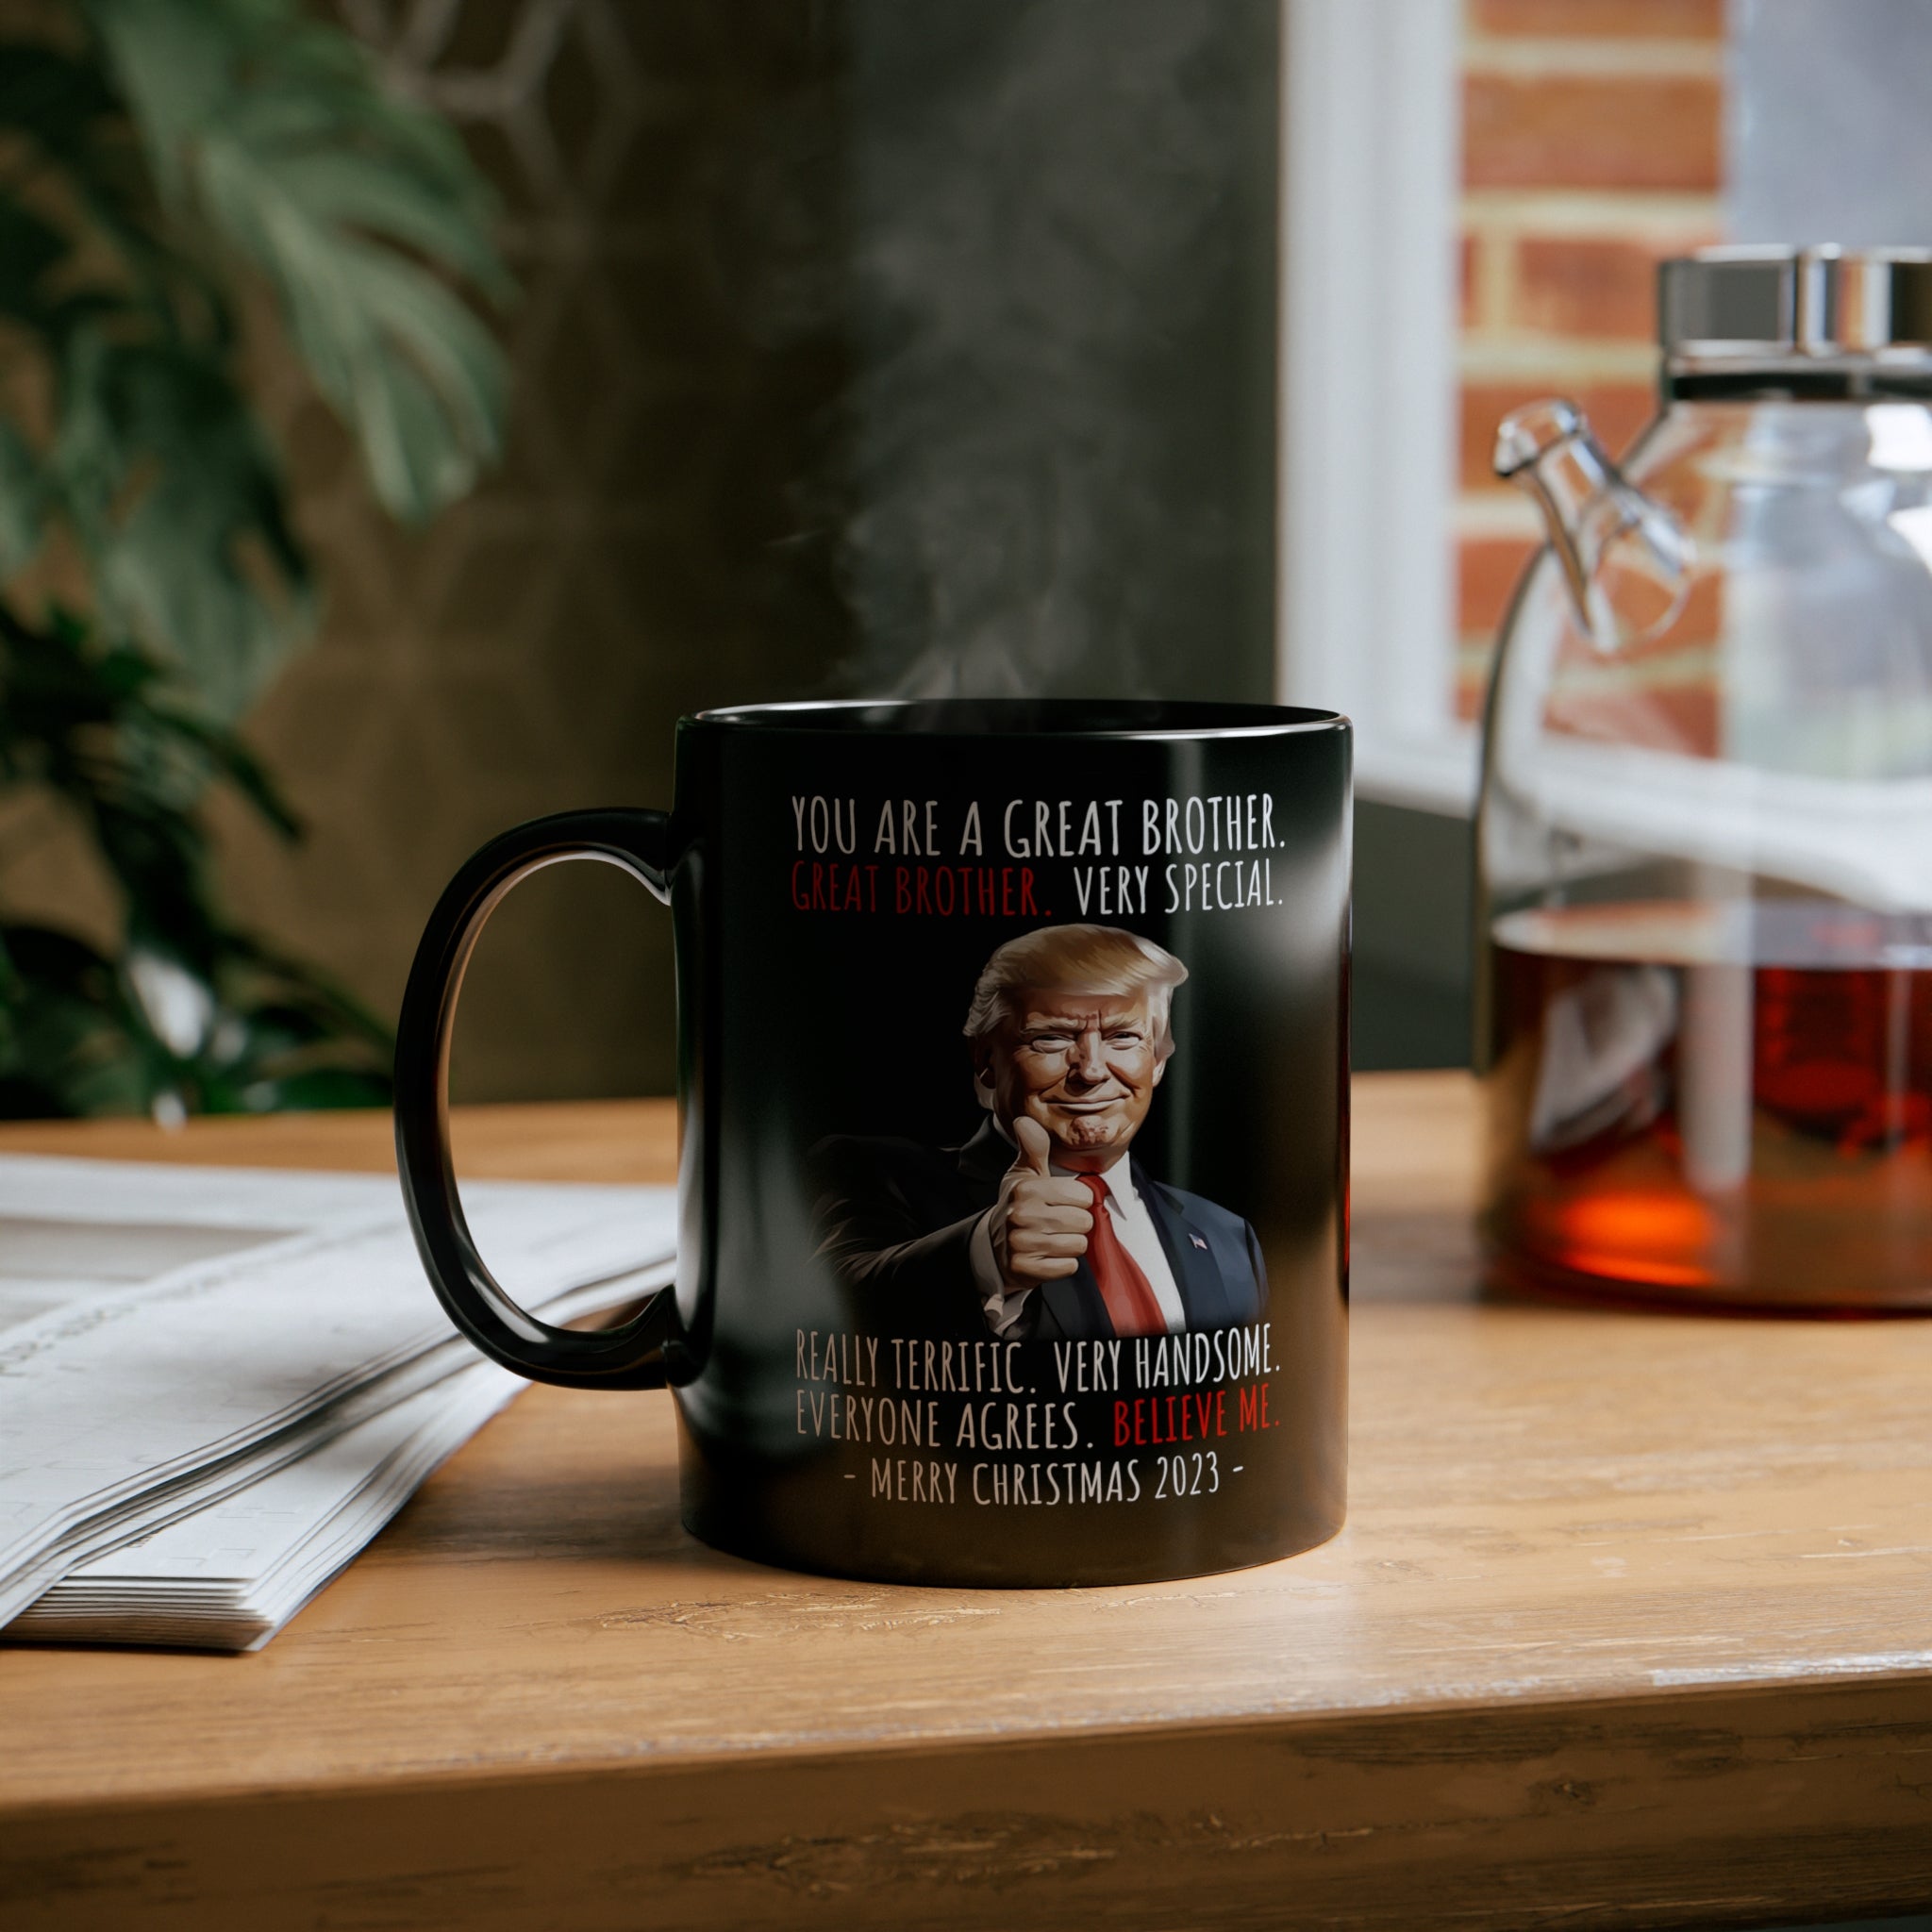 You Are A Great Brother Funny Trump Coffee Mug 11oz